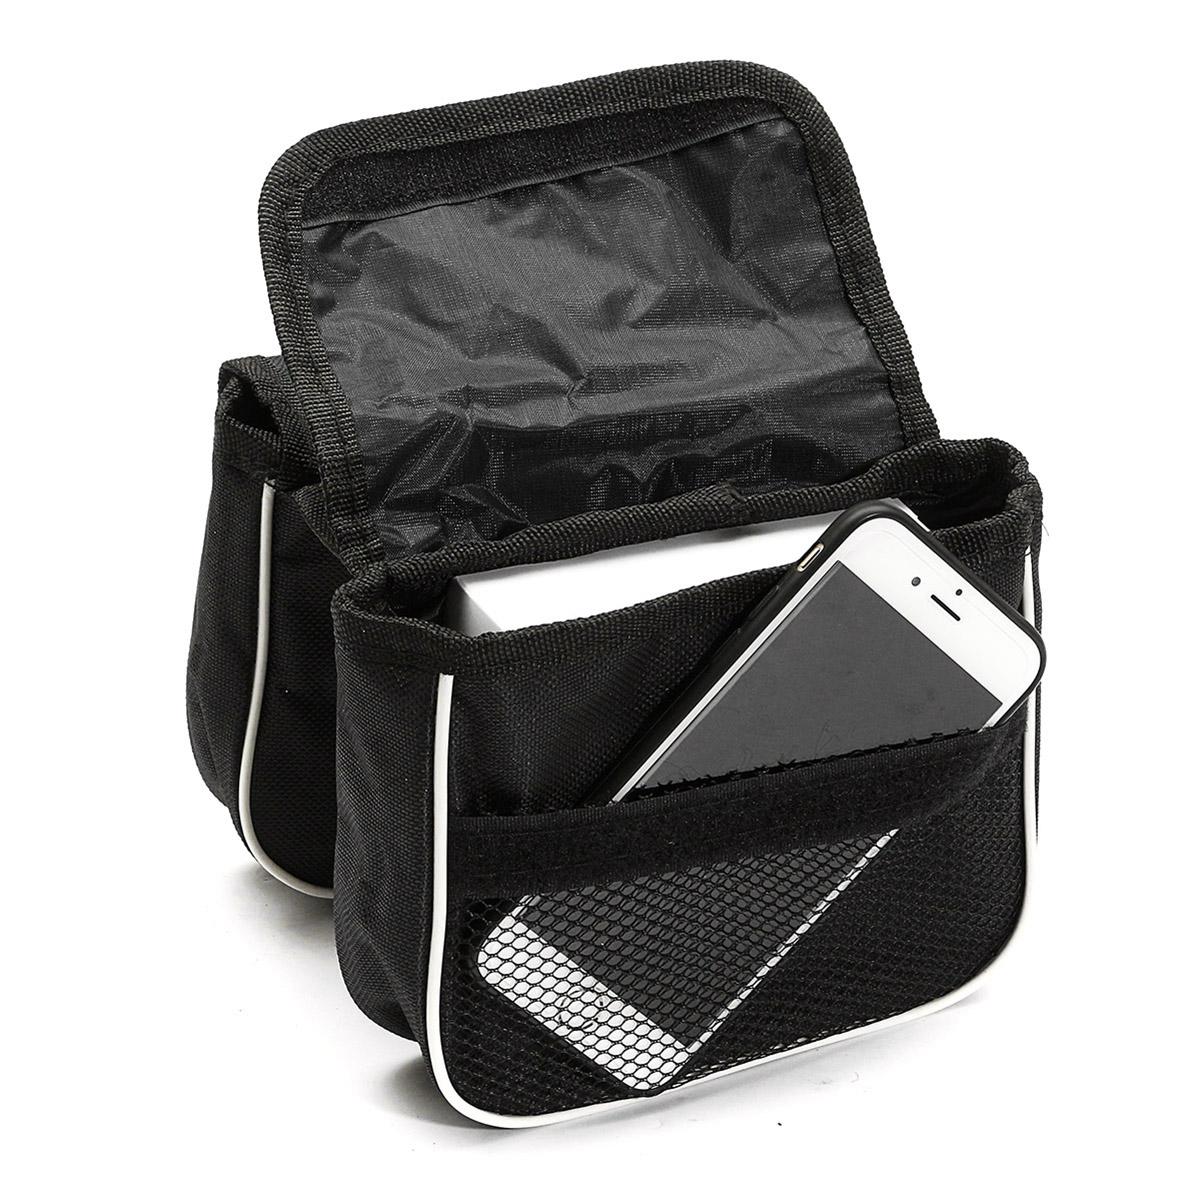 Bicycle-Bike-Front-Frame-Tube-Mobile-Phone-Pannier-Saddle-Bag-Case-Holder-Pouch-1110040